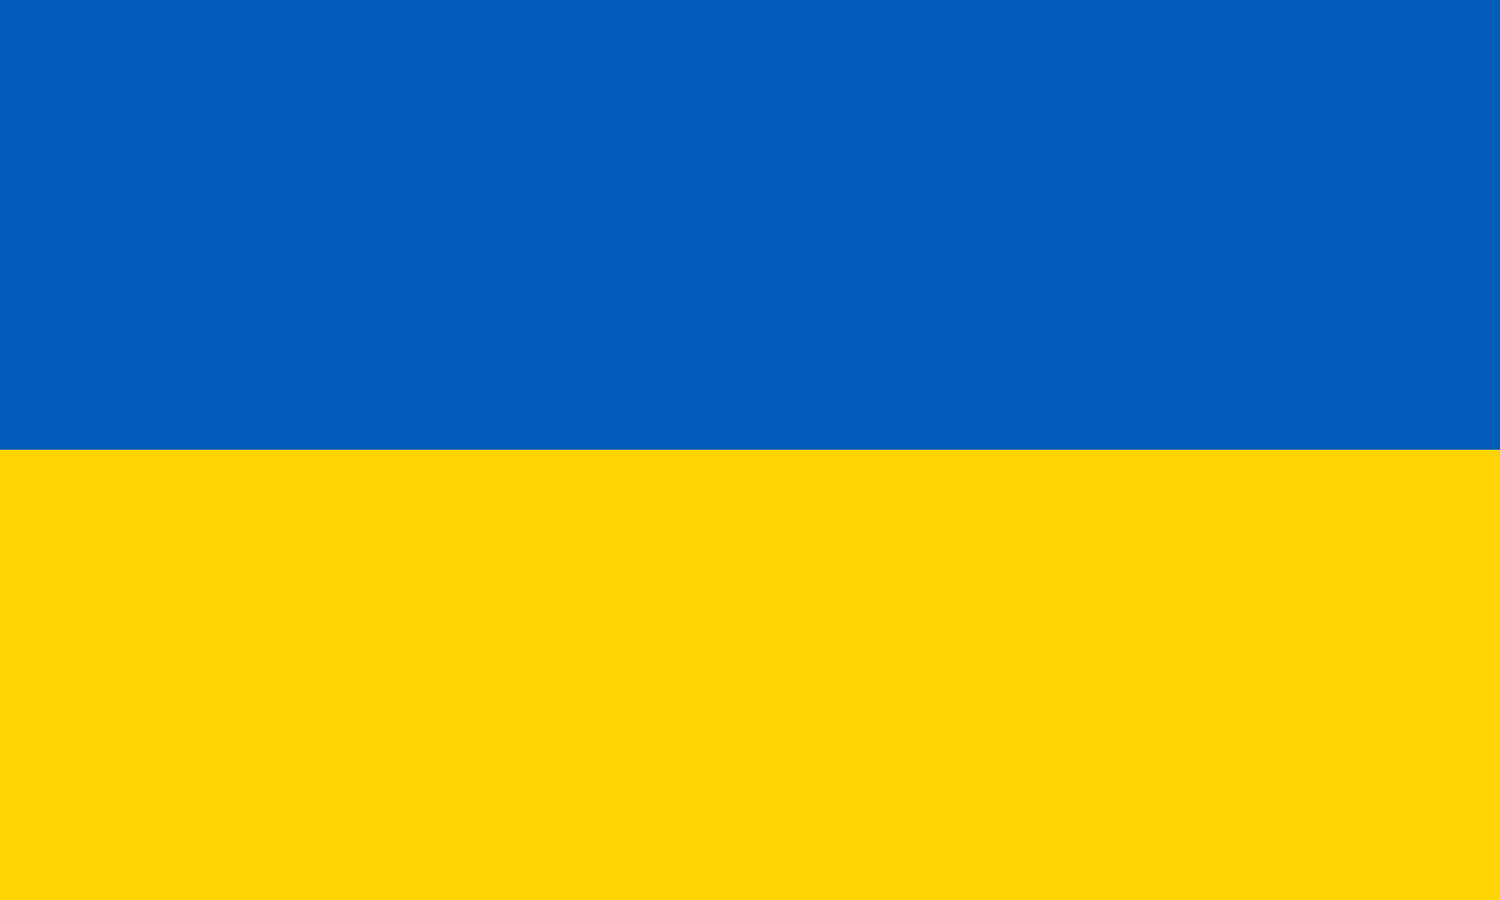 The Developers Alliance Stands With Ukraine